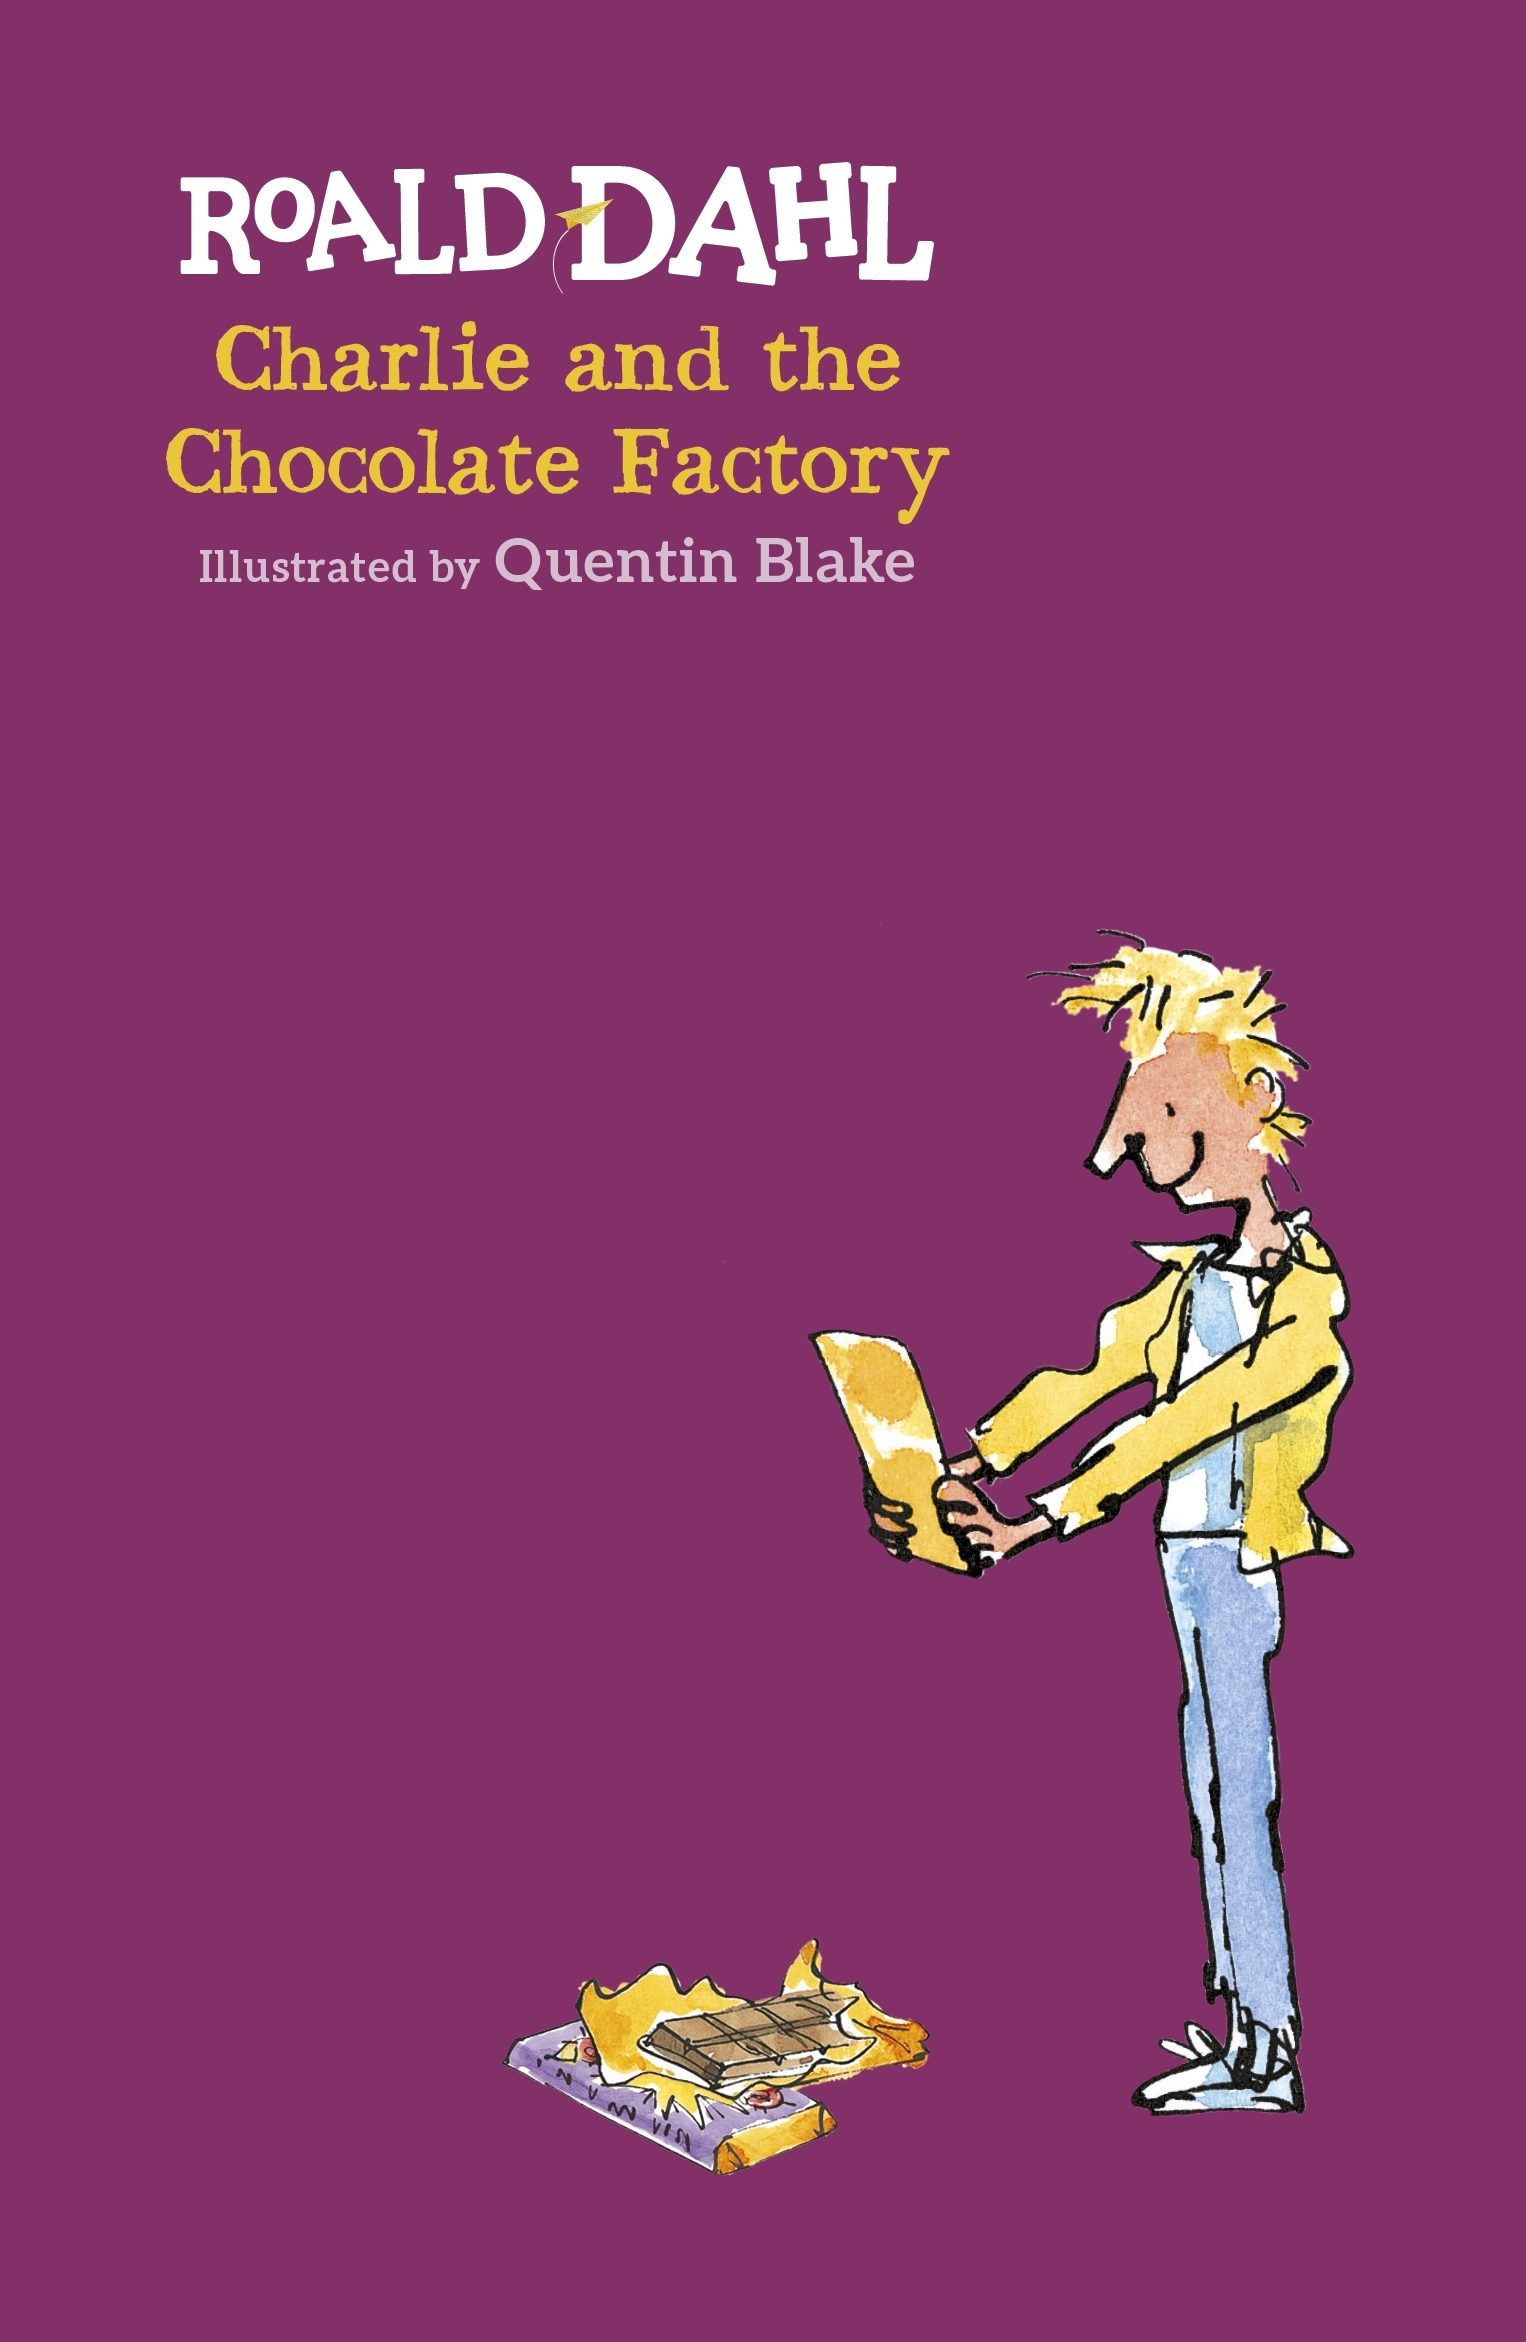 book report about charlie and the chocolate factory